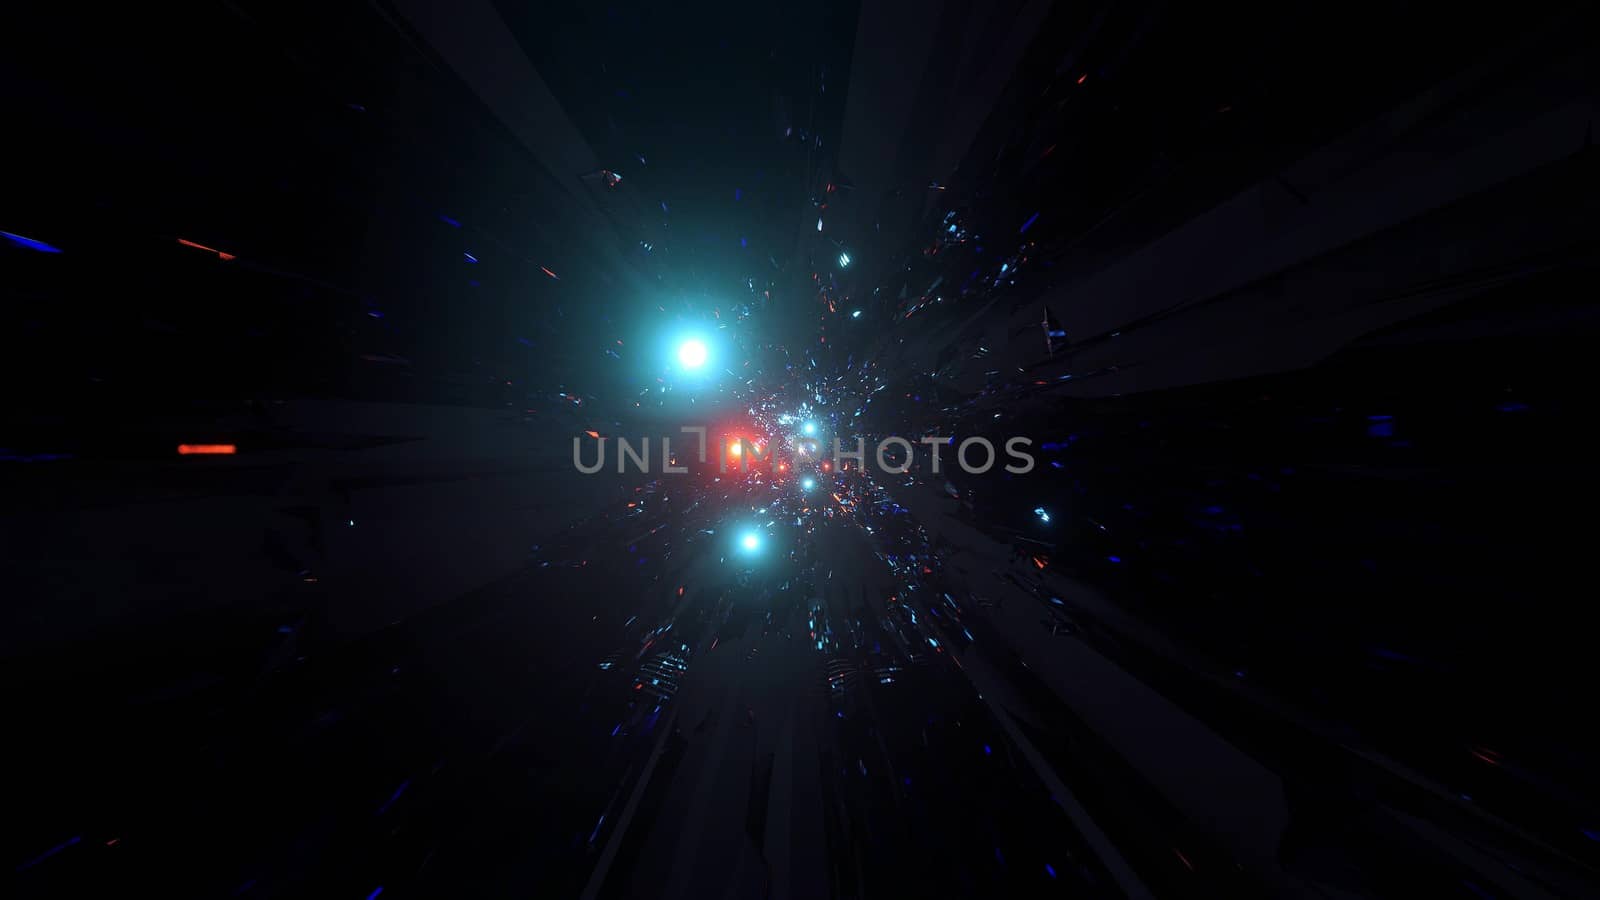 abstract space galaxy tunnel with glowing sphere planets 3d illustration design background wallpaper, cool glowing 3d rendering graphic artwork